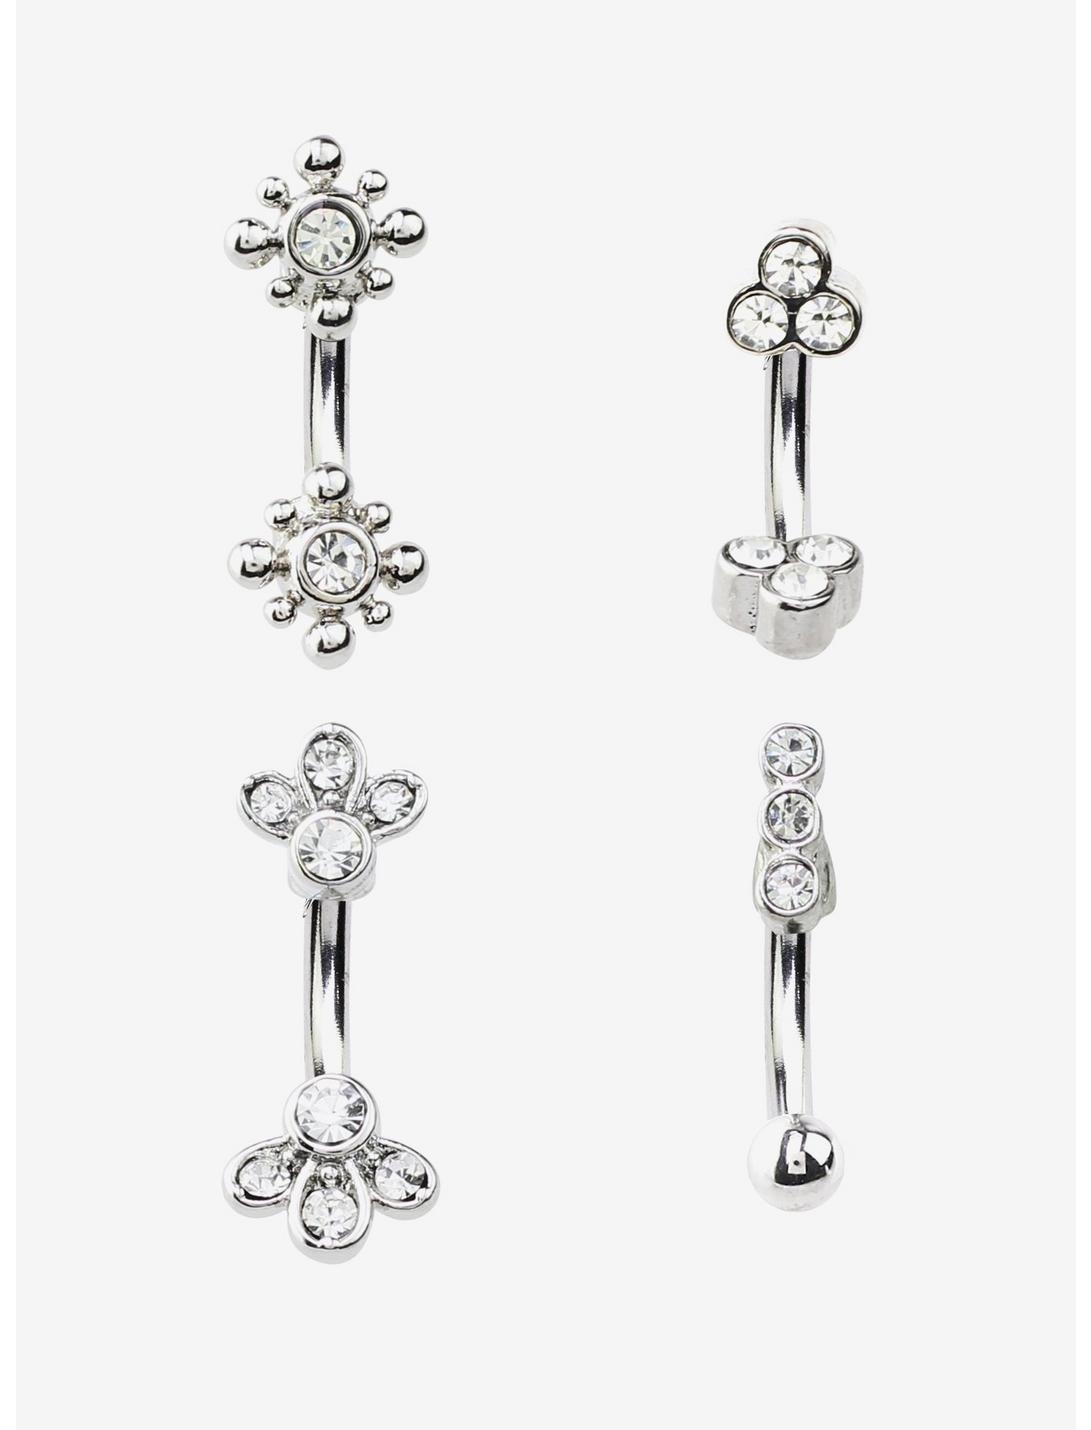 Steel Silver CZ Gems Eyebrow Barbell 4 Pack, SILVER, hi-res